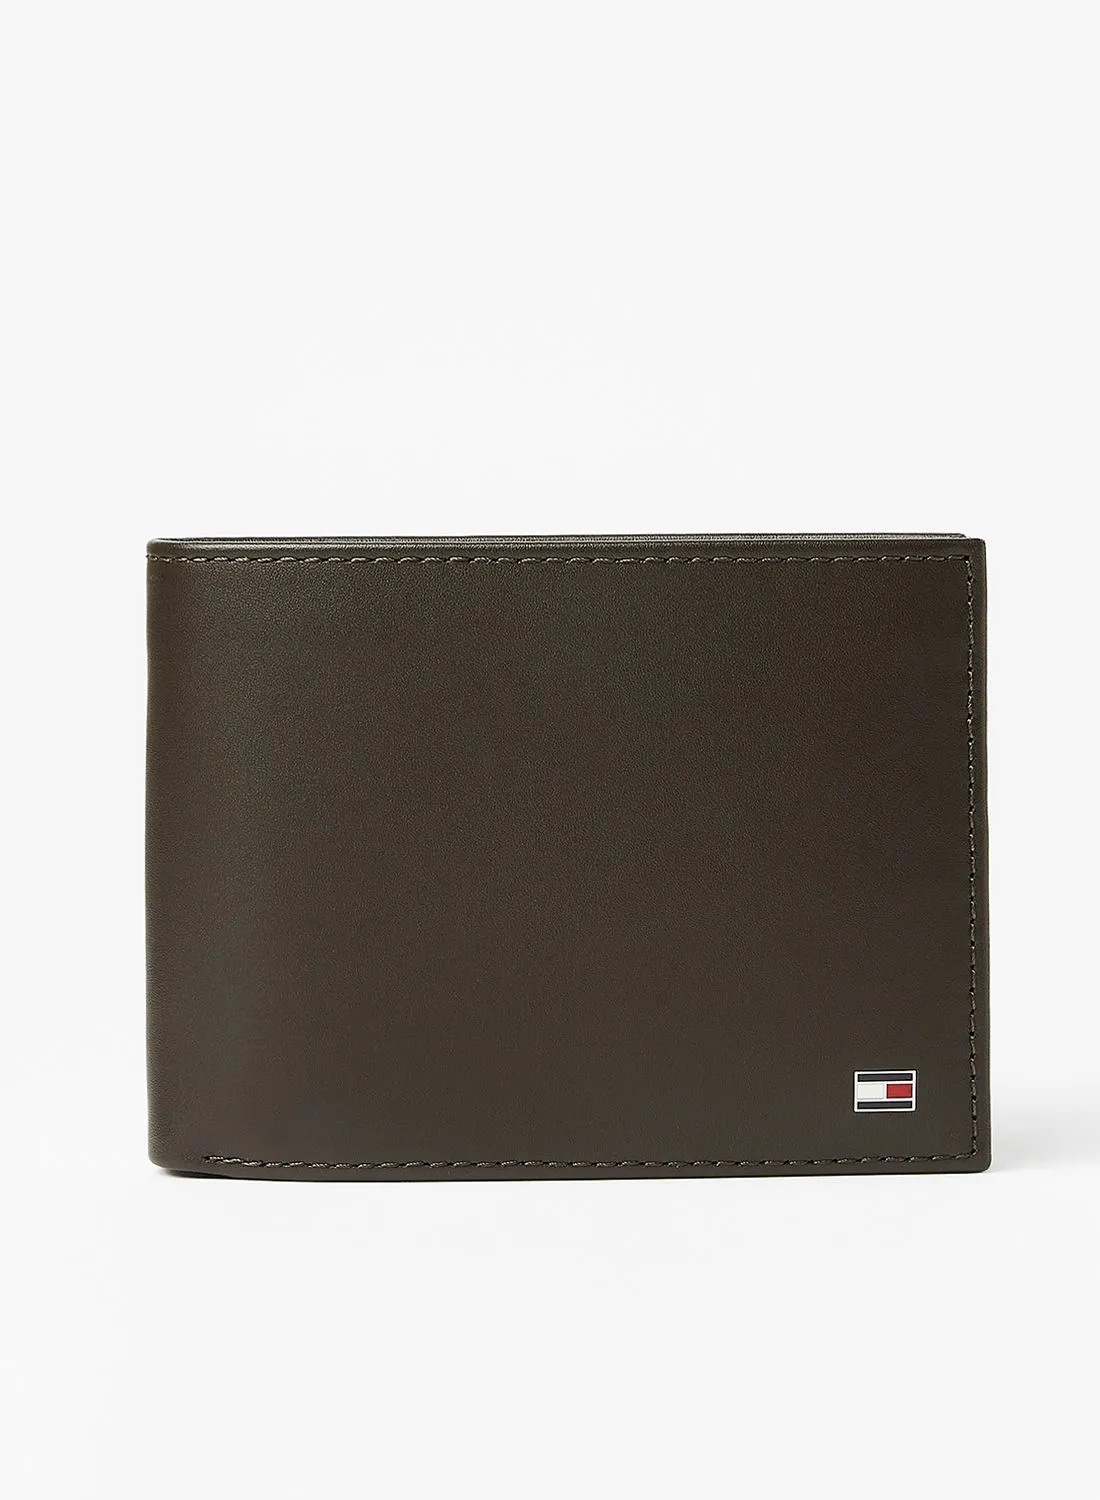 TOMMY HILFIGER Small Metro Leather Wallet Brown